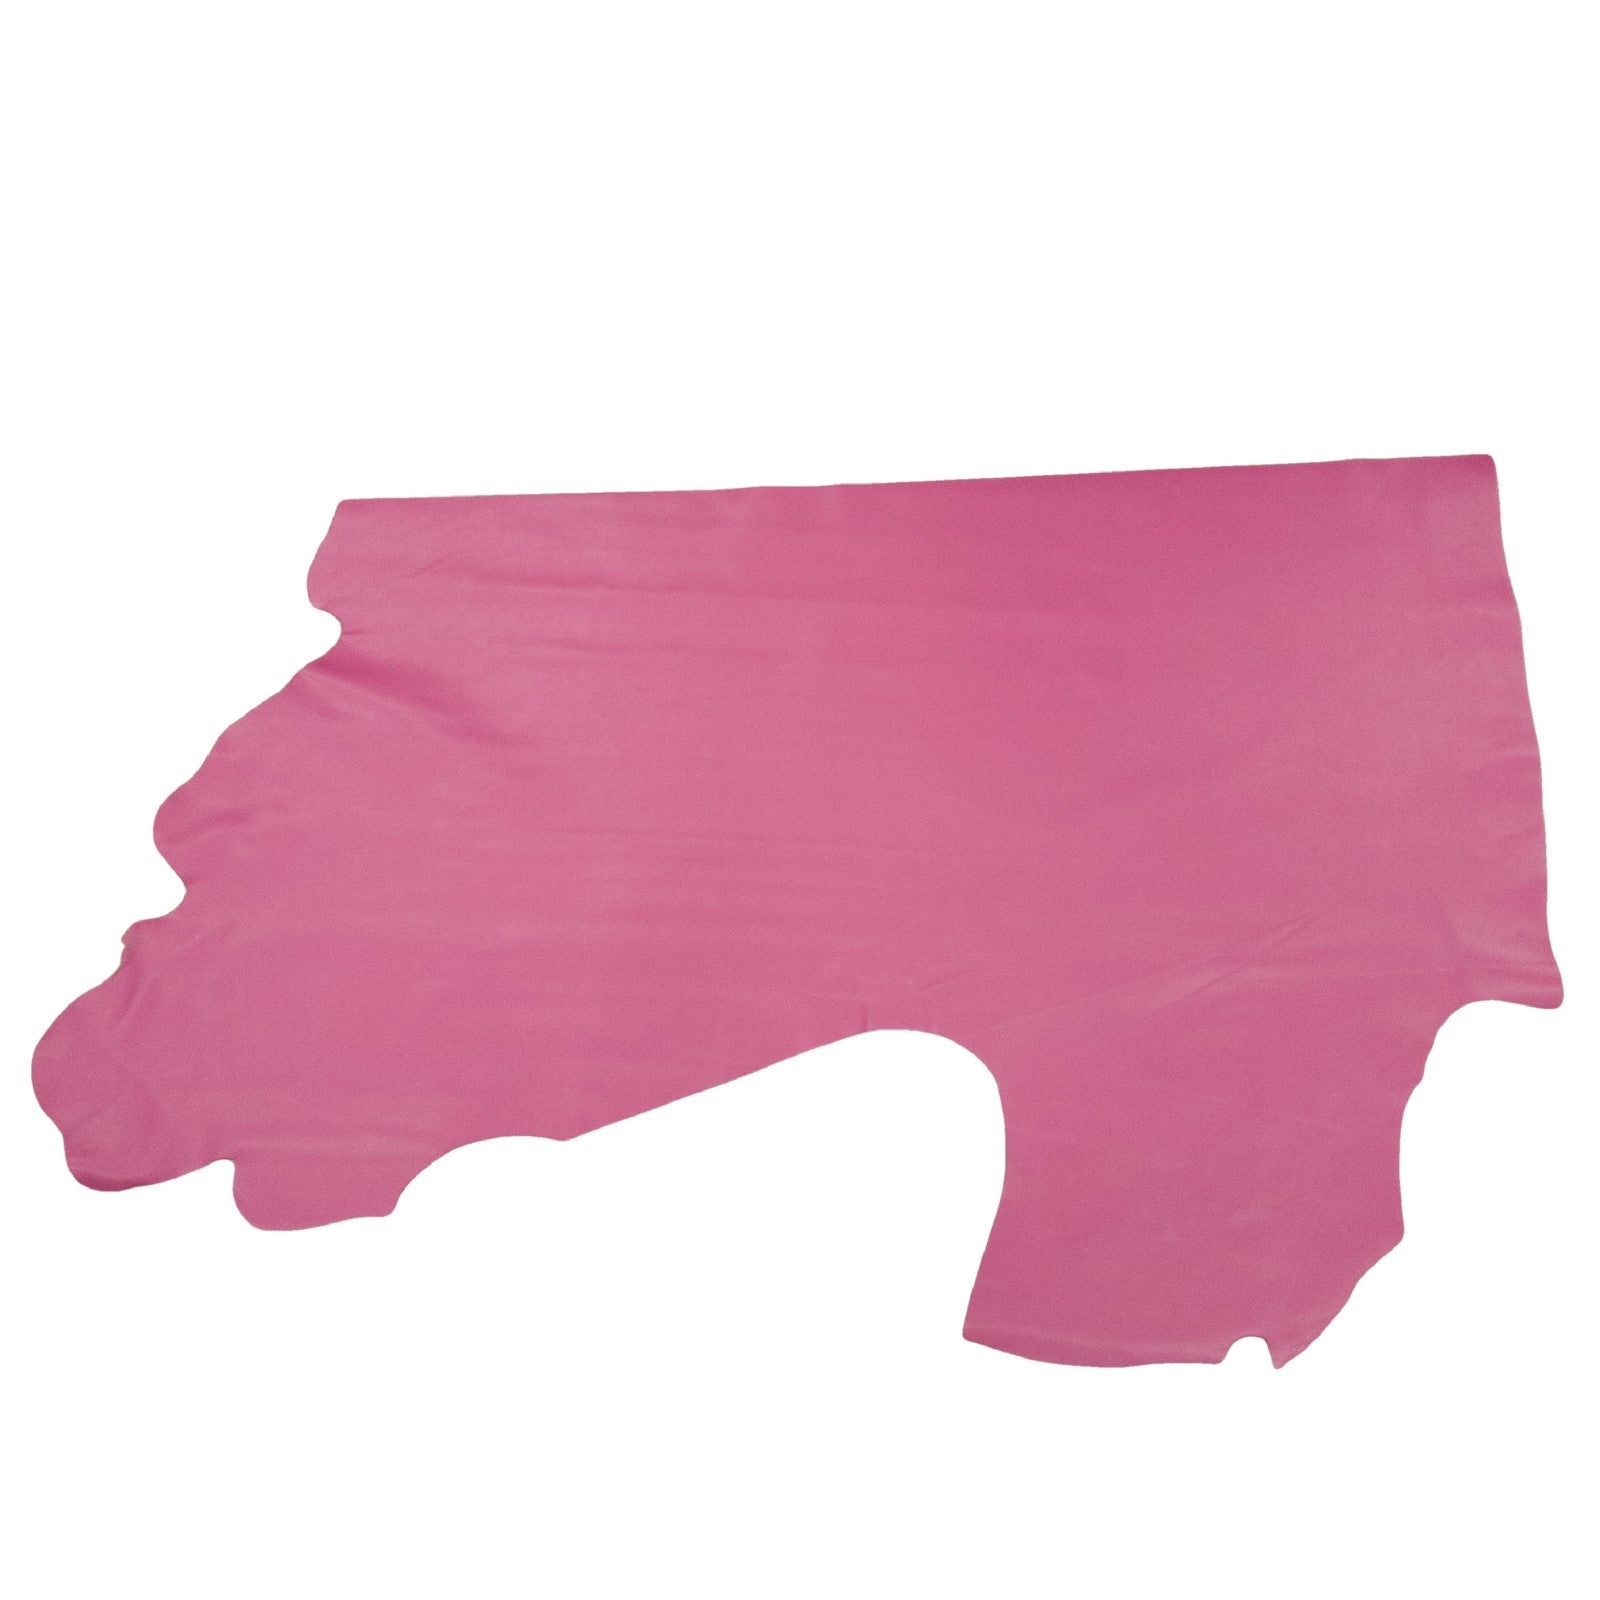 Messi Miami Pink, 3-3.5 oz Cow Hides, Starting Lineup, Bottom Piece / 6.5-7.5 Sq Ft | The Leather Guy